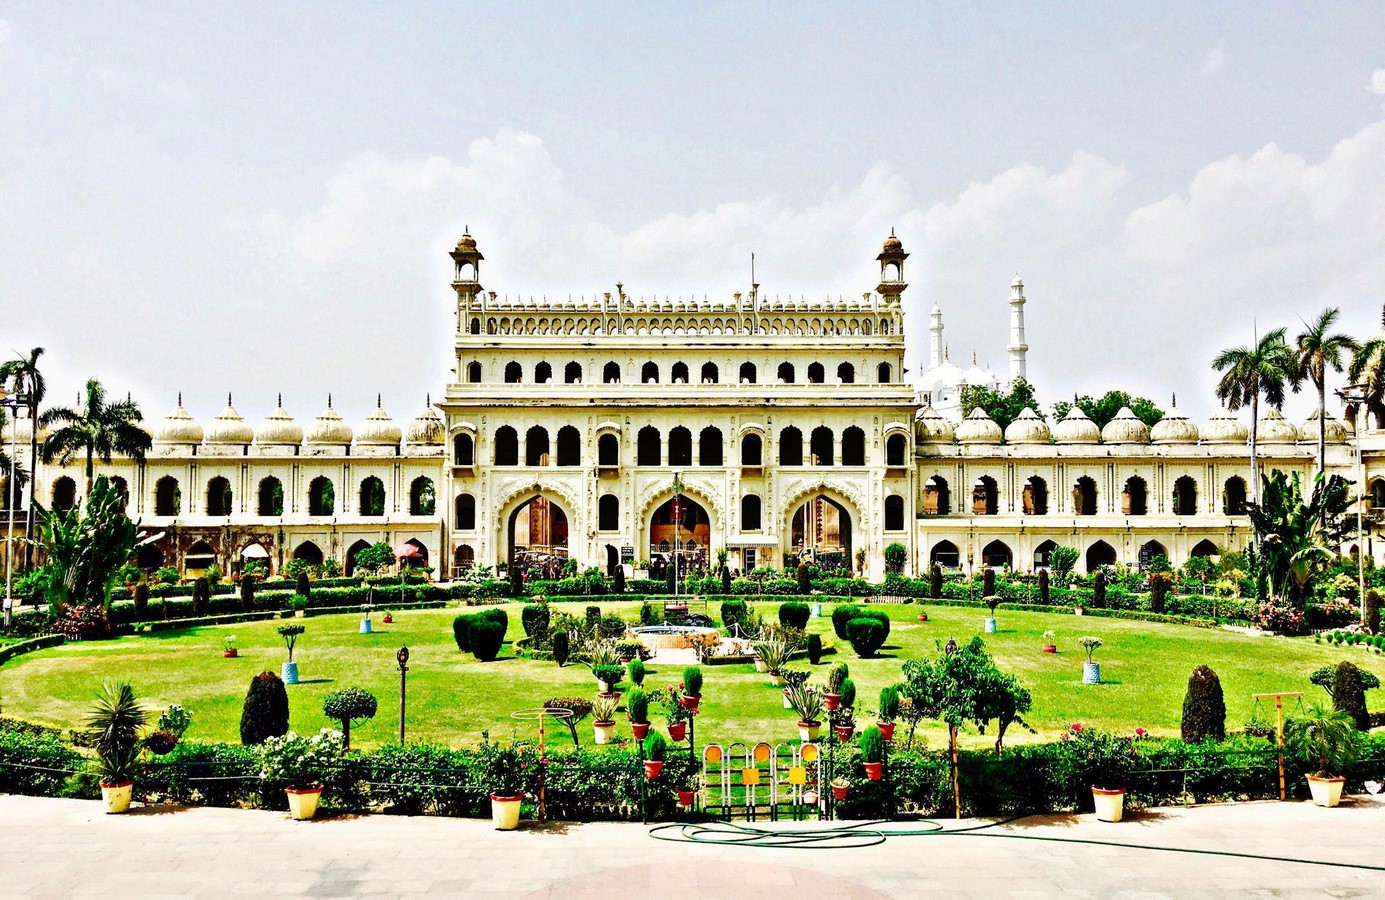 The architecture of Lucknow - The fascinating architecture from the times of Nawabs of Awadh - Sheet2